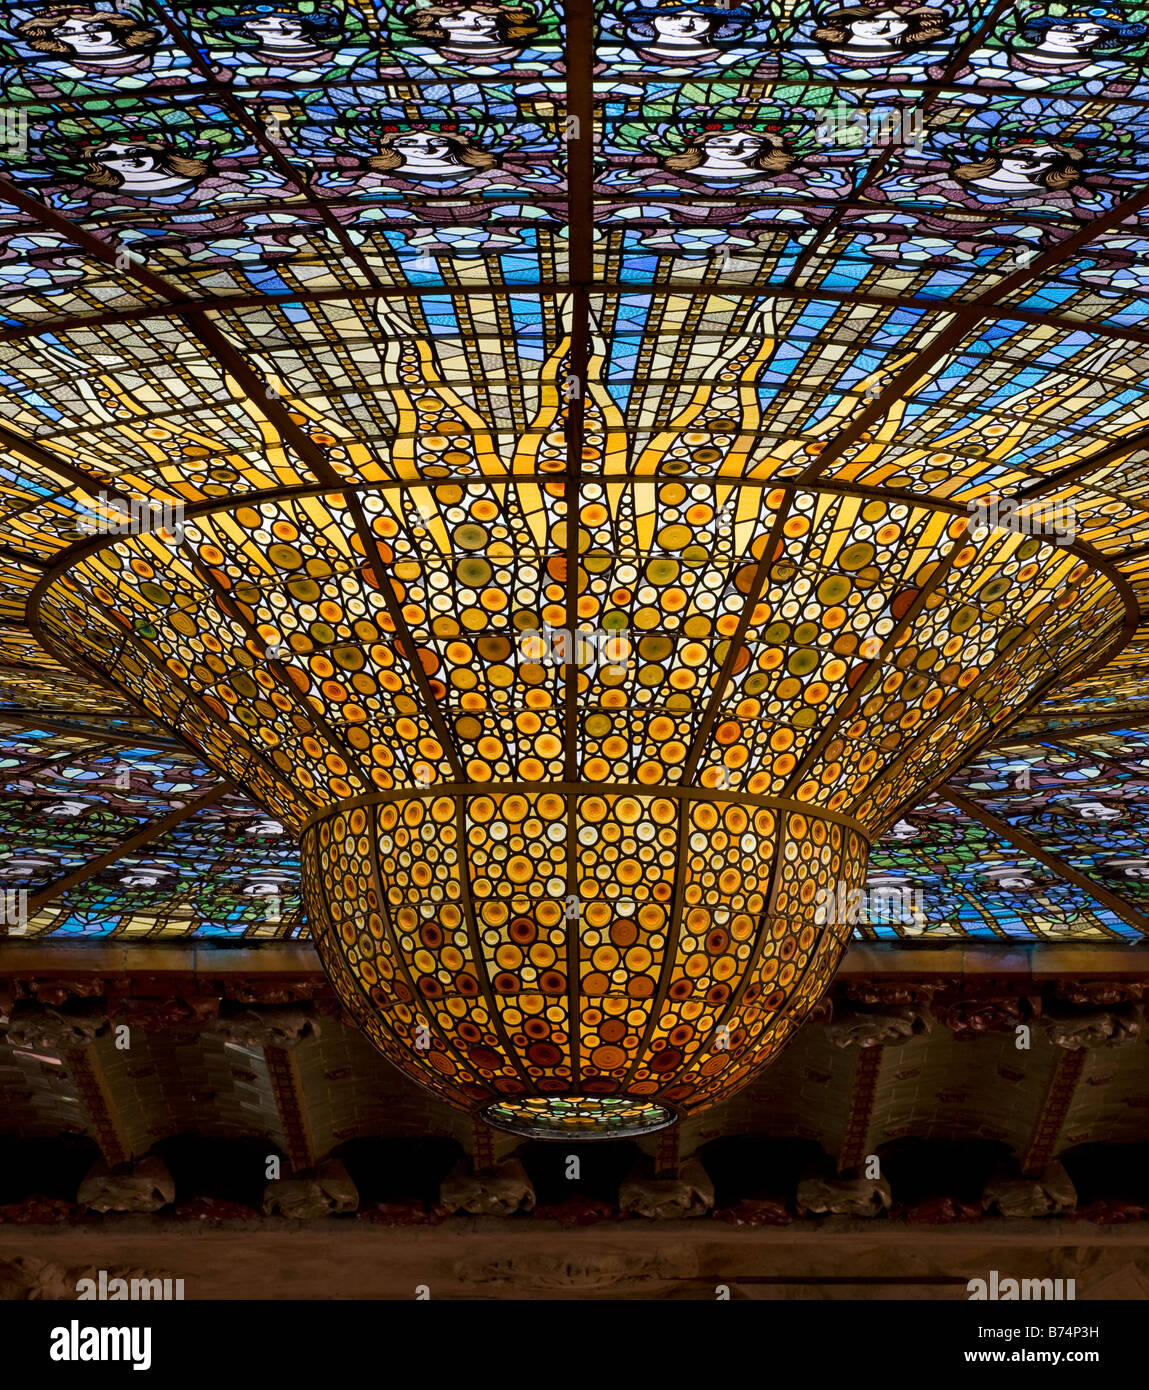 Skylight of stained glass with central inverted dome designed by Antoni Rigalt, Palau de la Musica Catalana, Barcelona Stock Photo